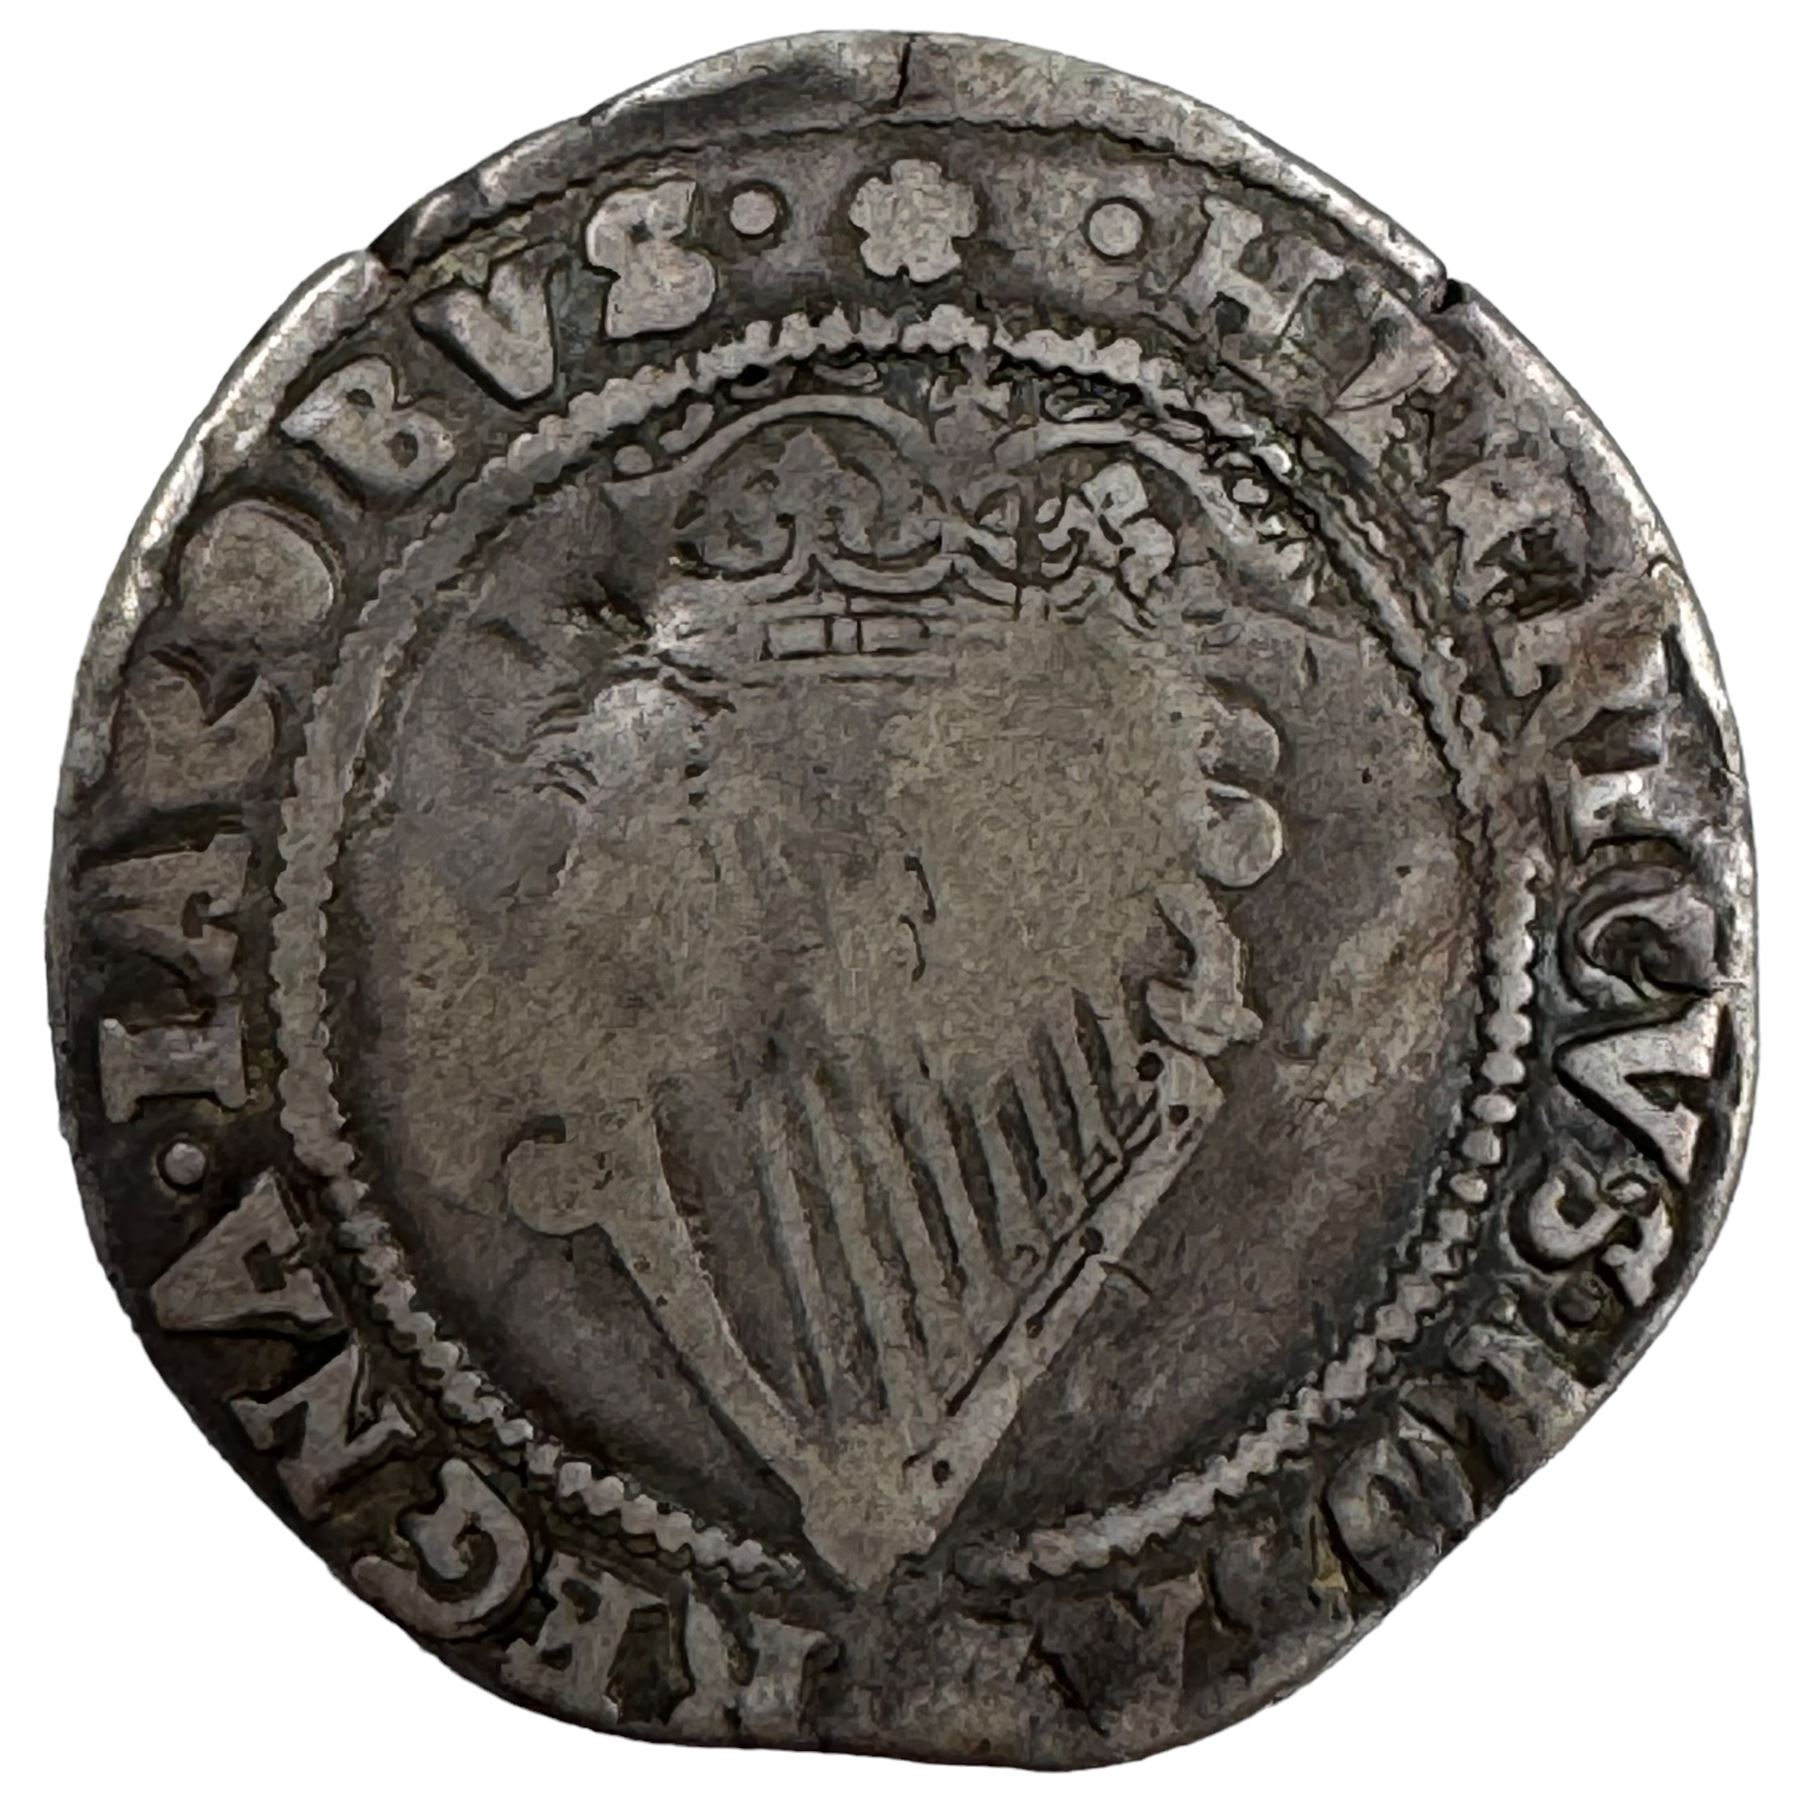 James I Irish 17th century silver one shilling coin - Image 2 of 11